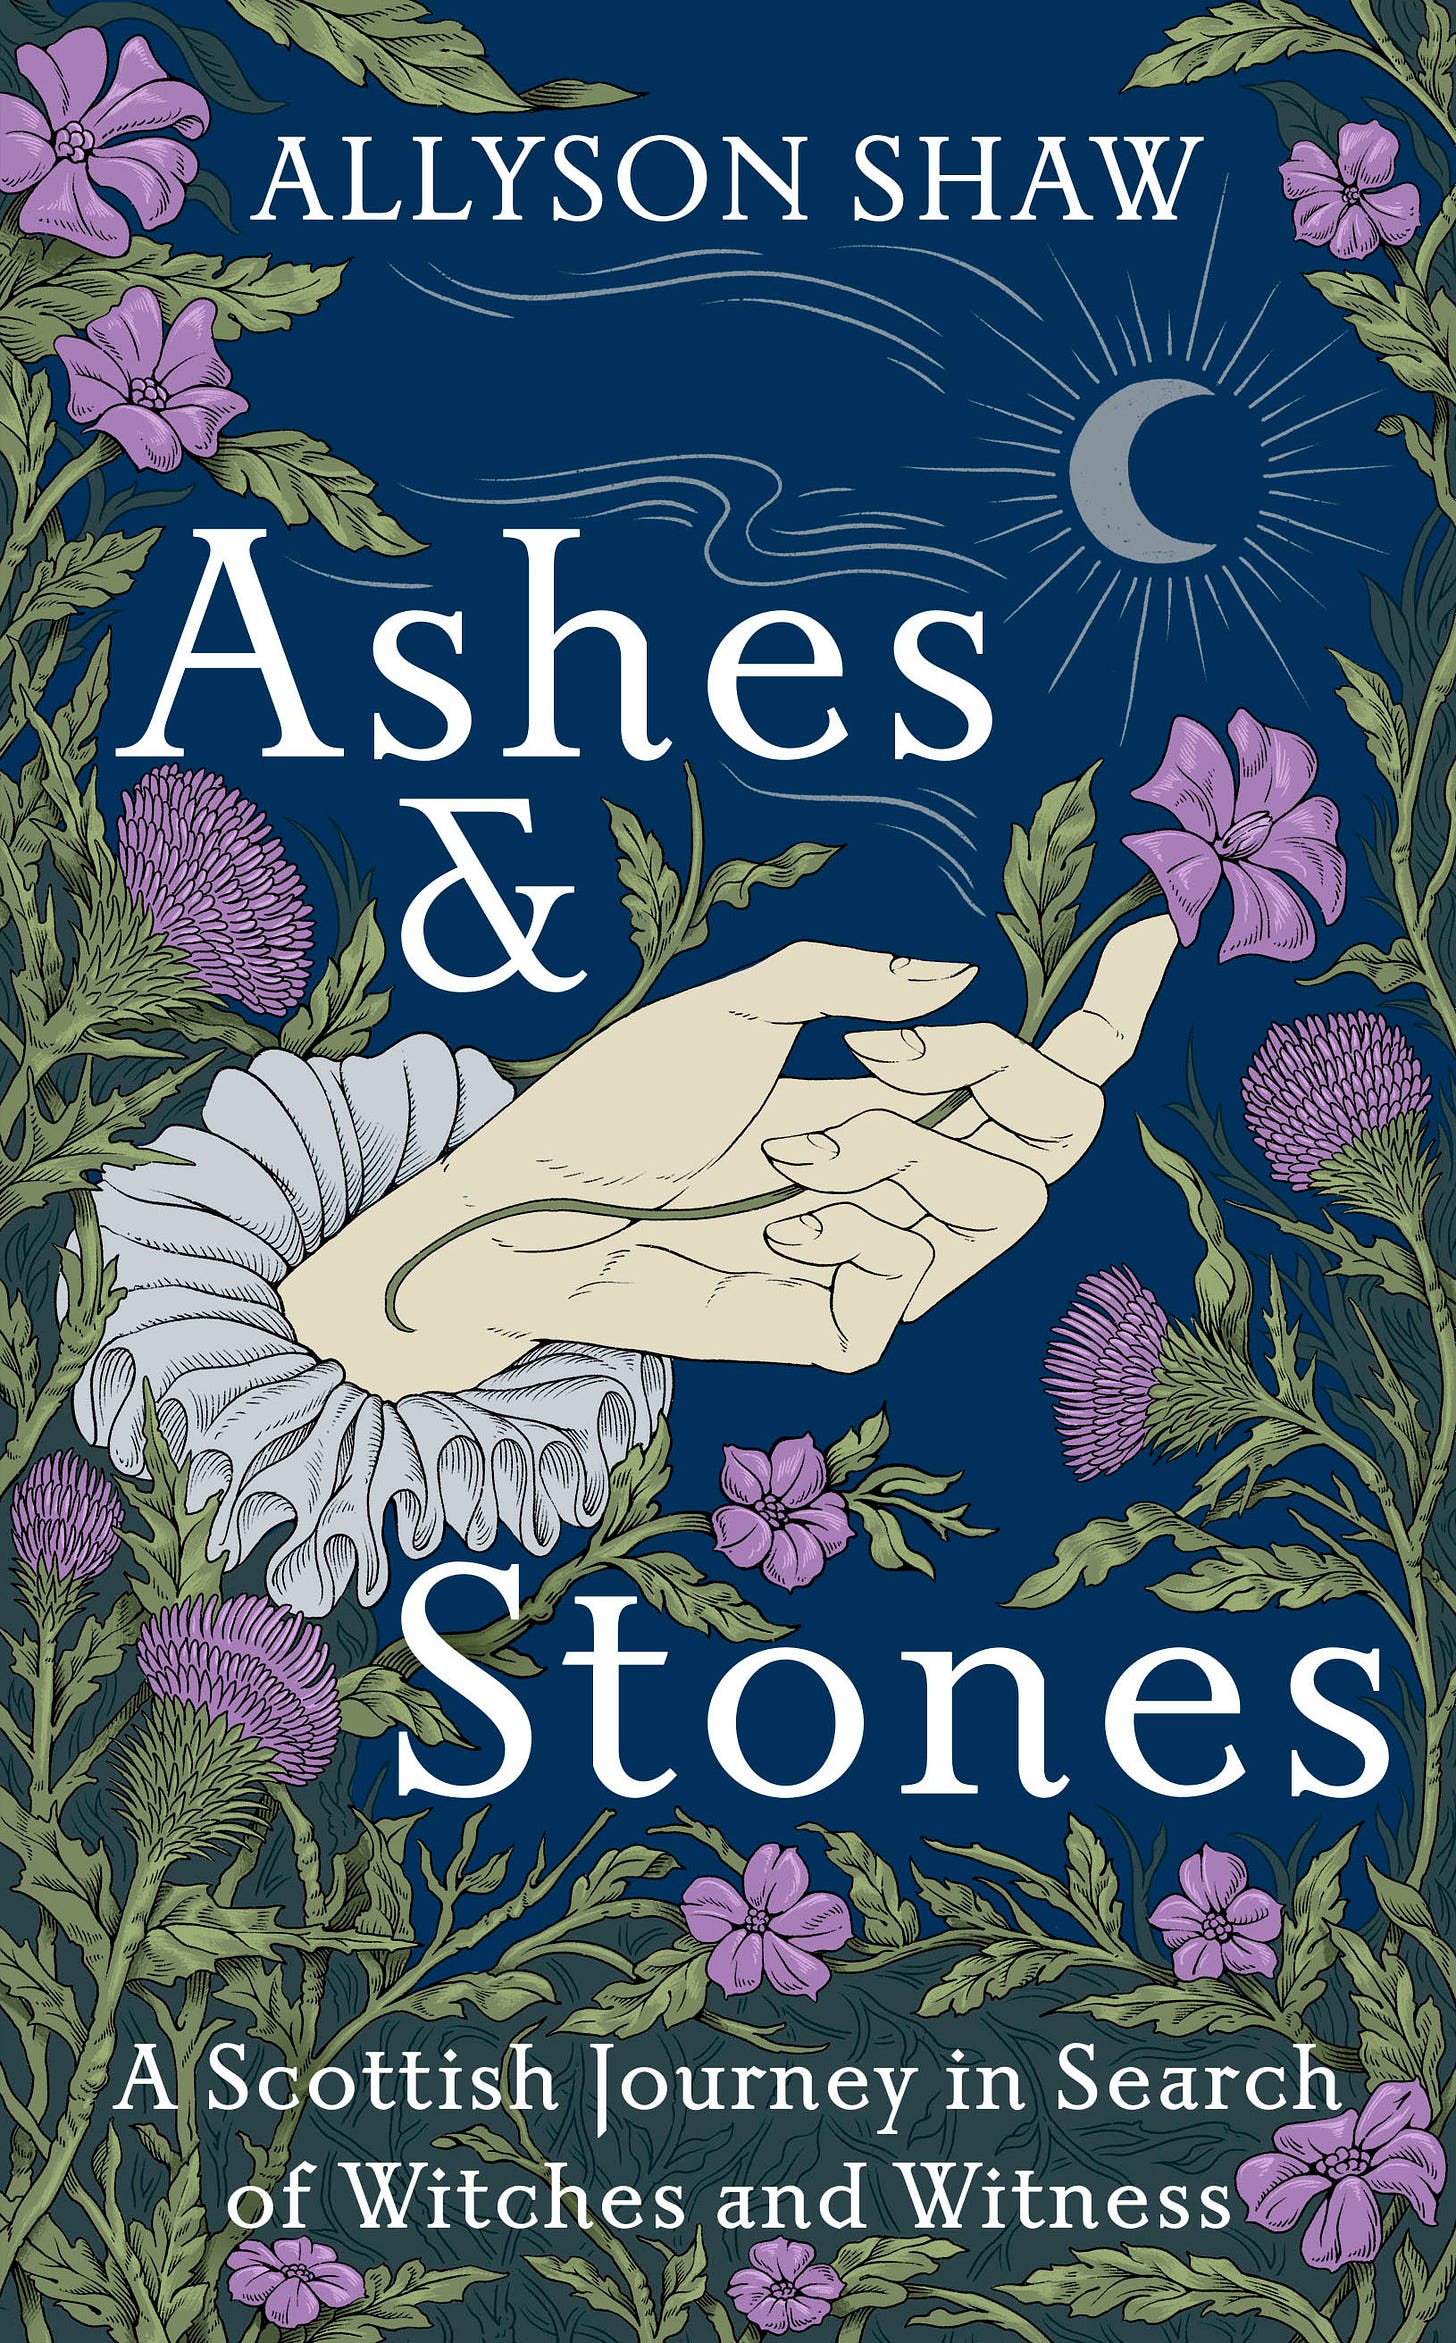 Book cover of Ashes and Stones by Allyson Shaw with a blue background, a hand reaching out and a tangle of purple flowers